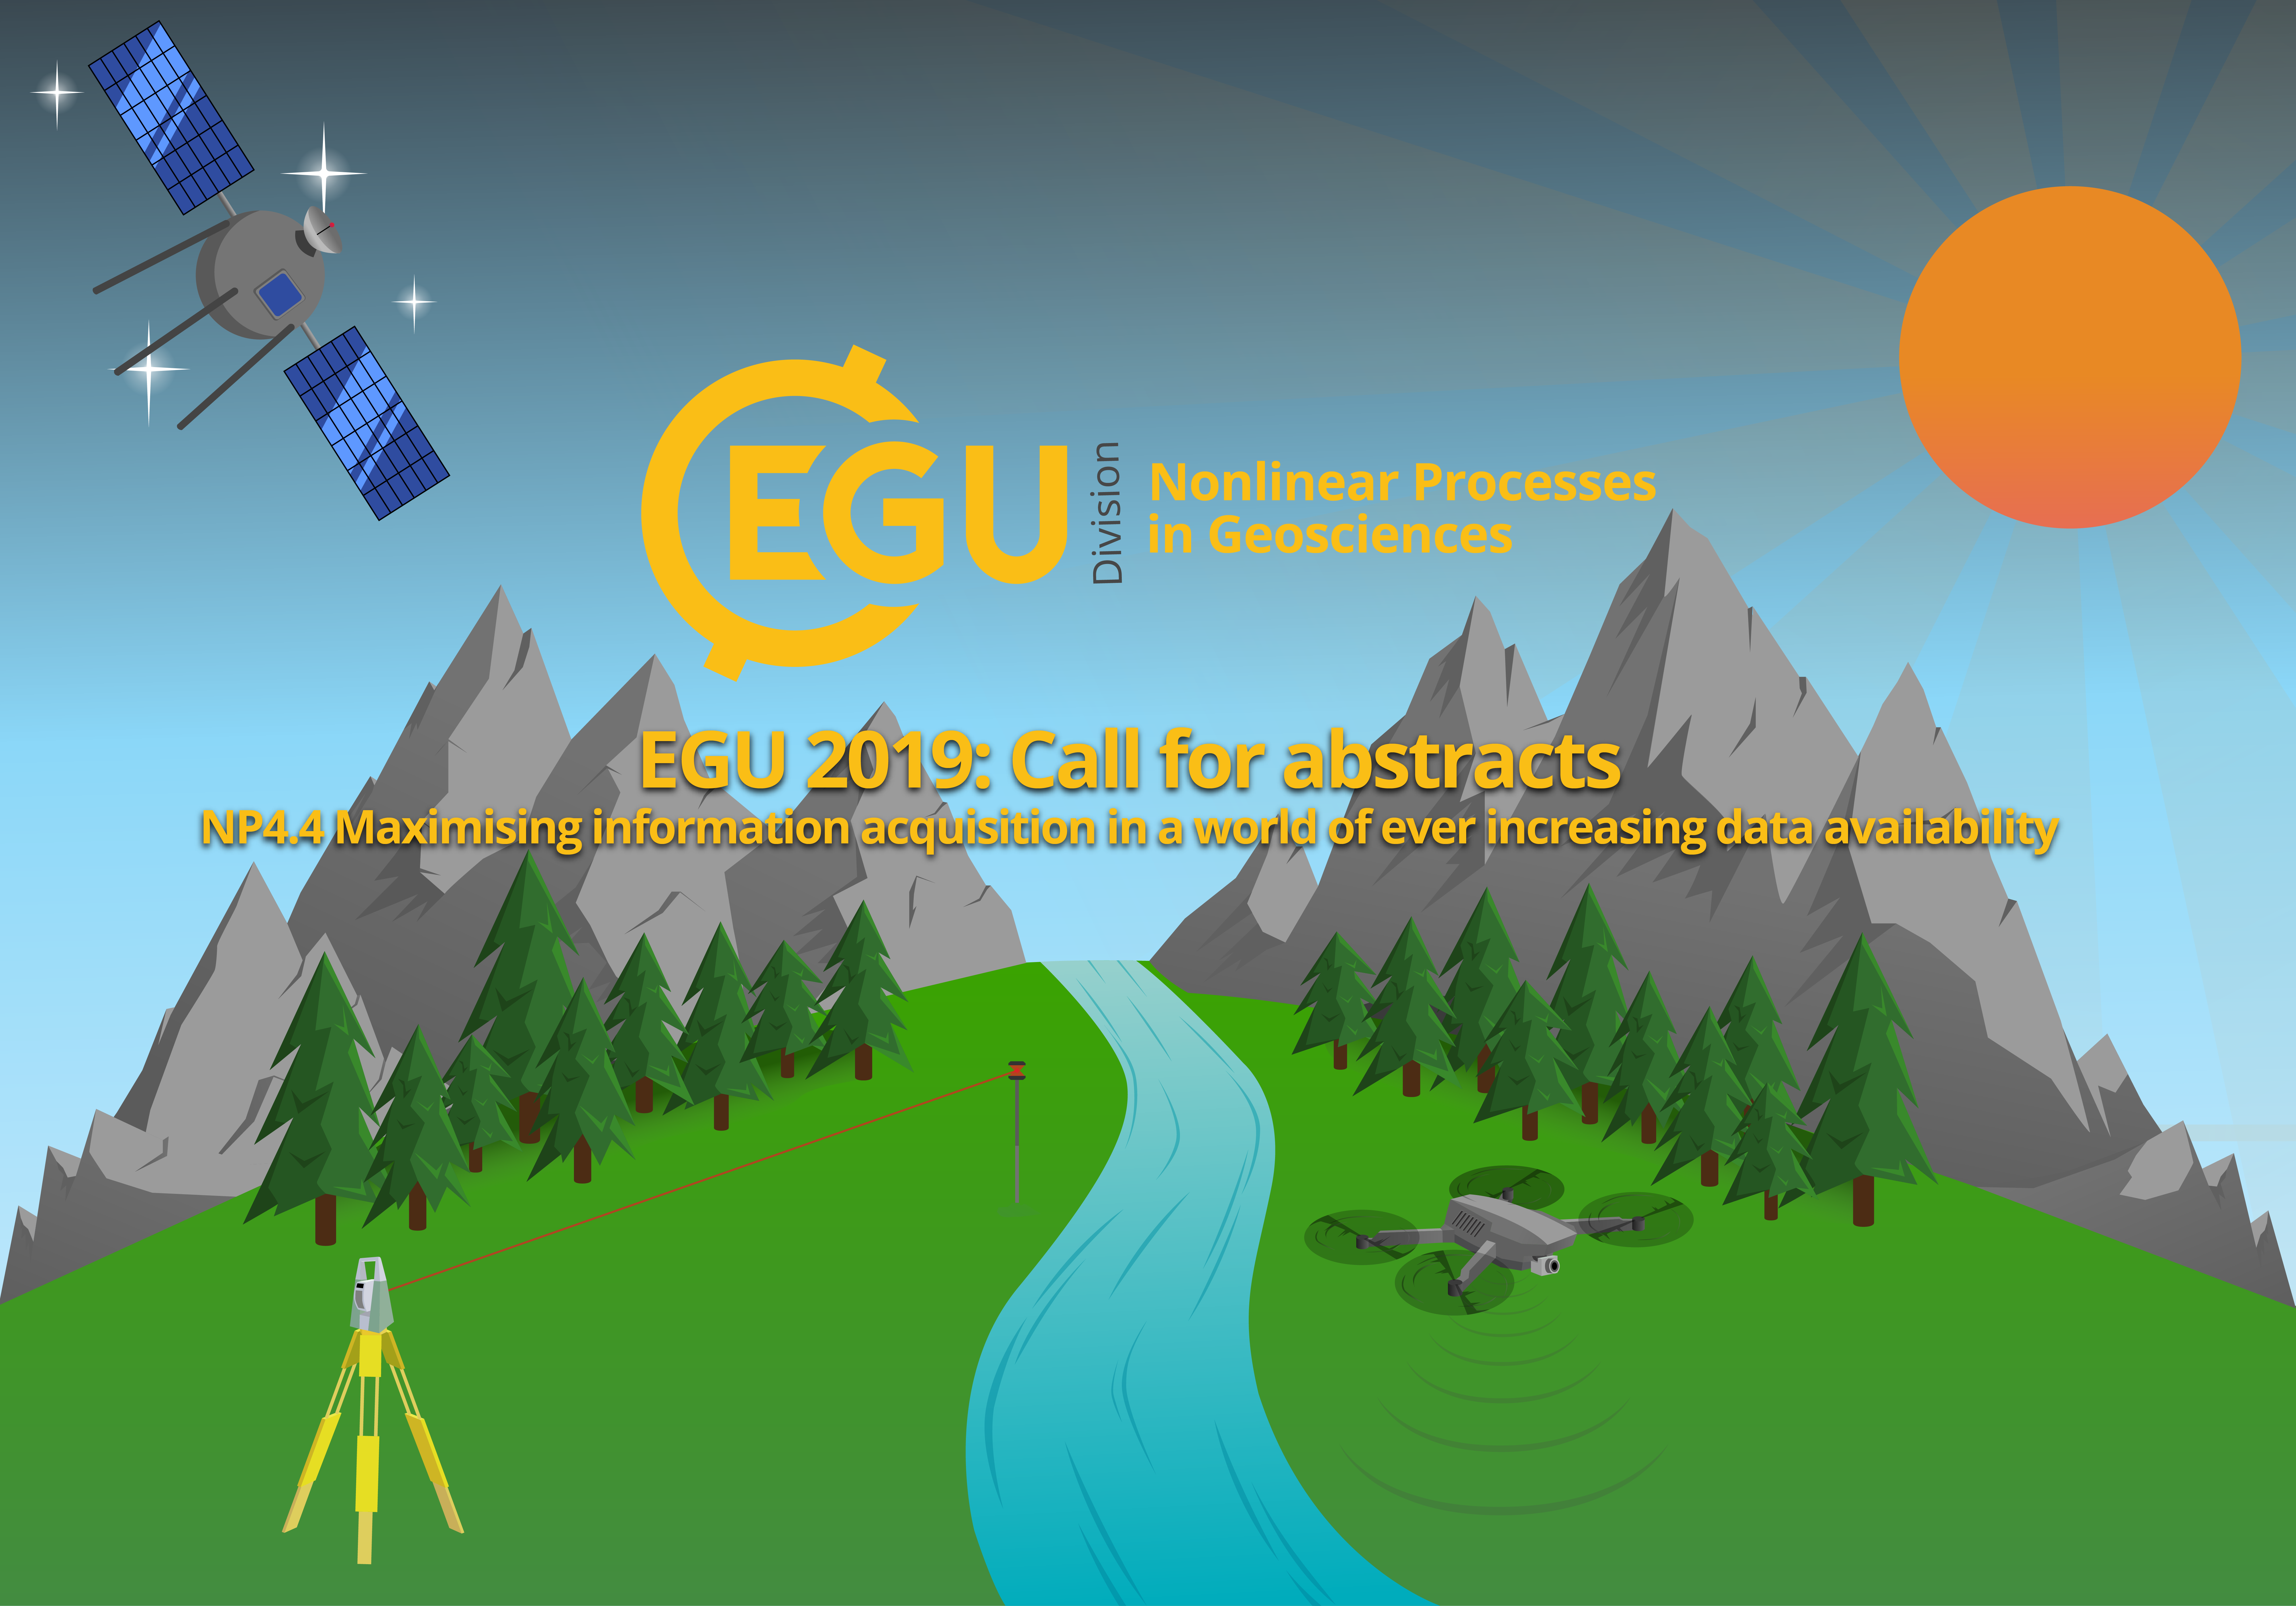 EGU 2019: Call for abstracts!